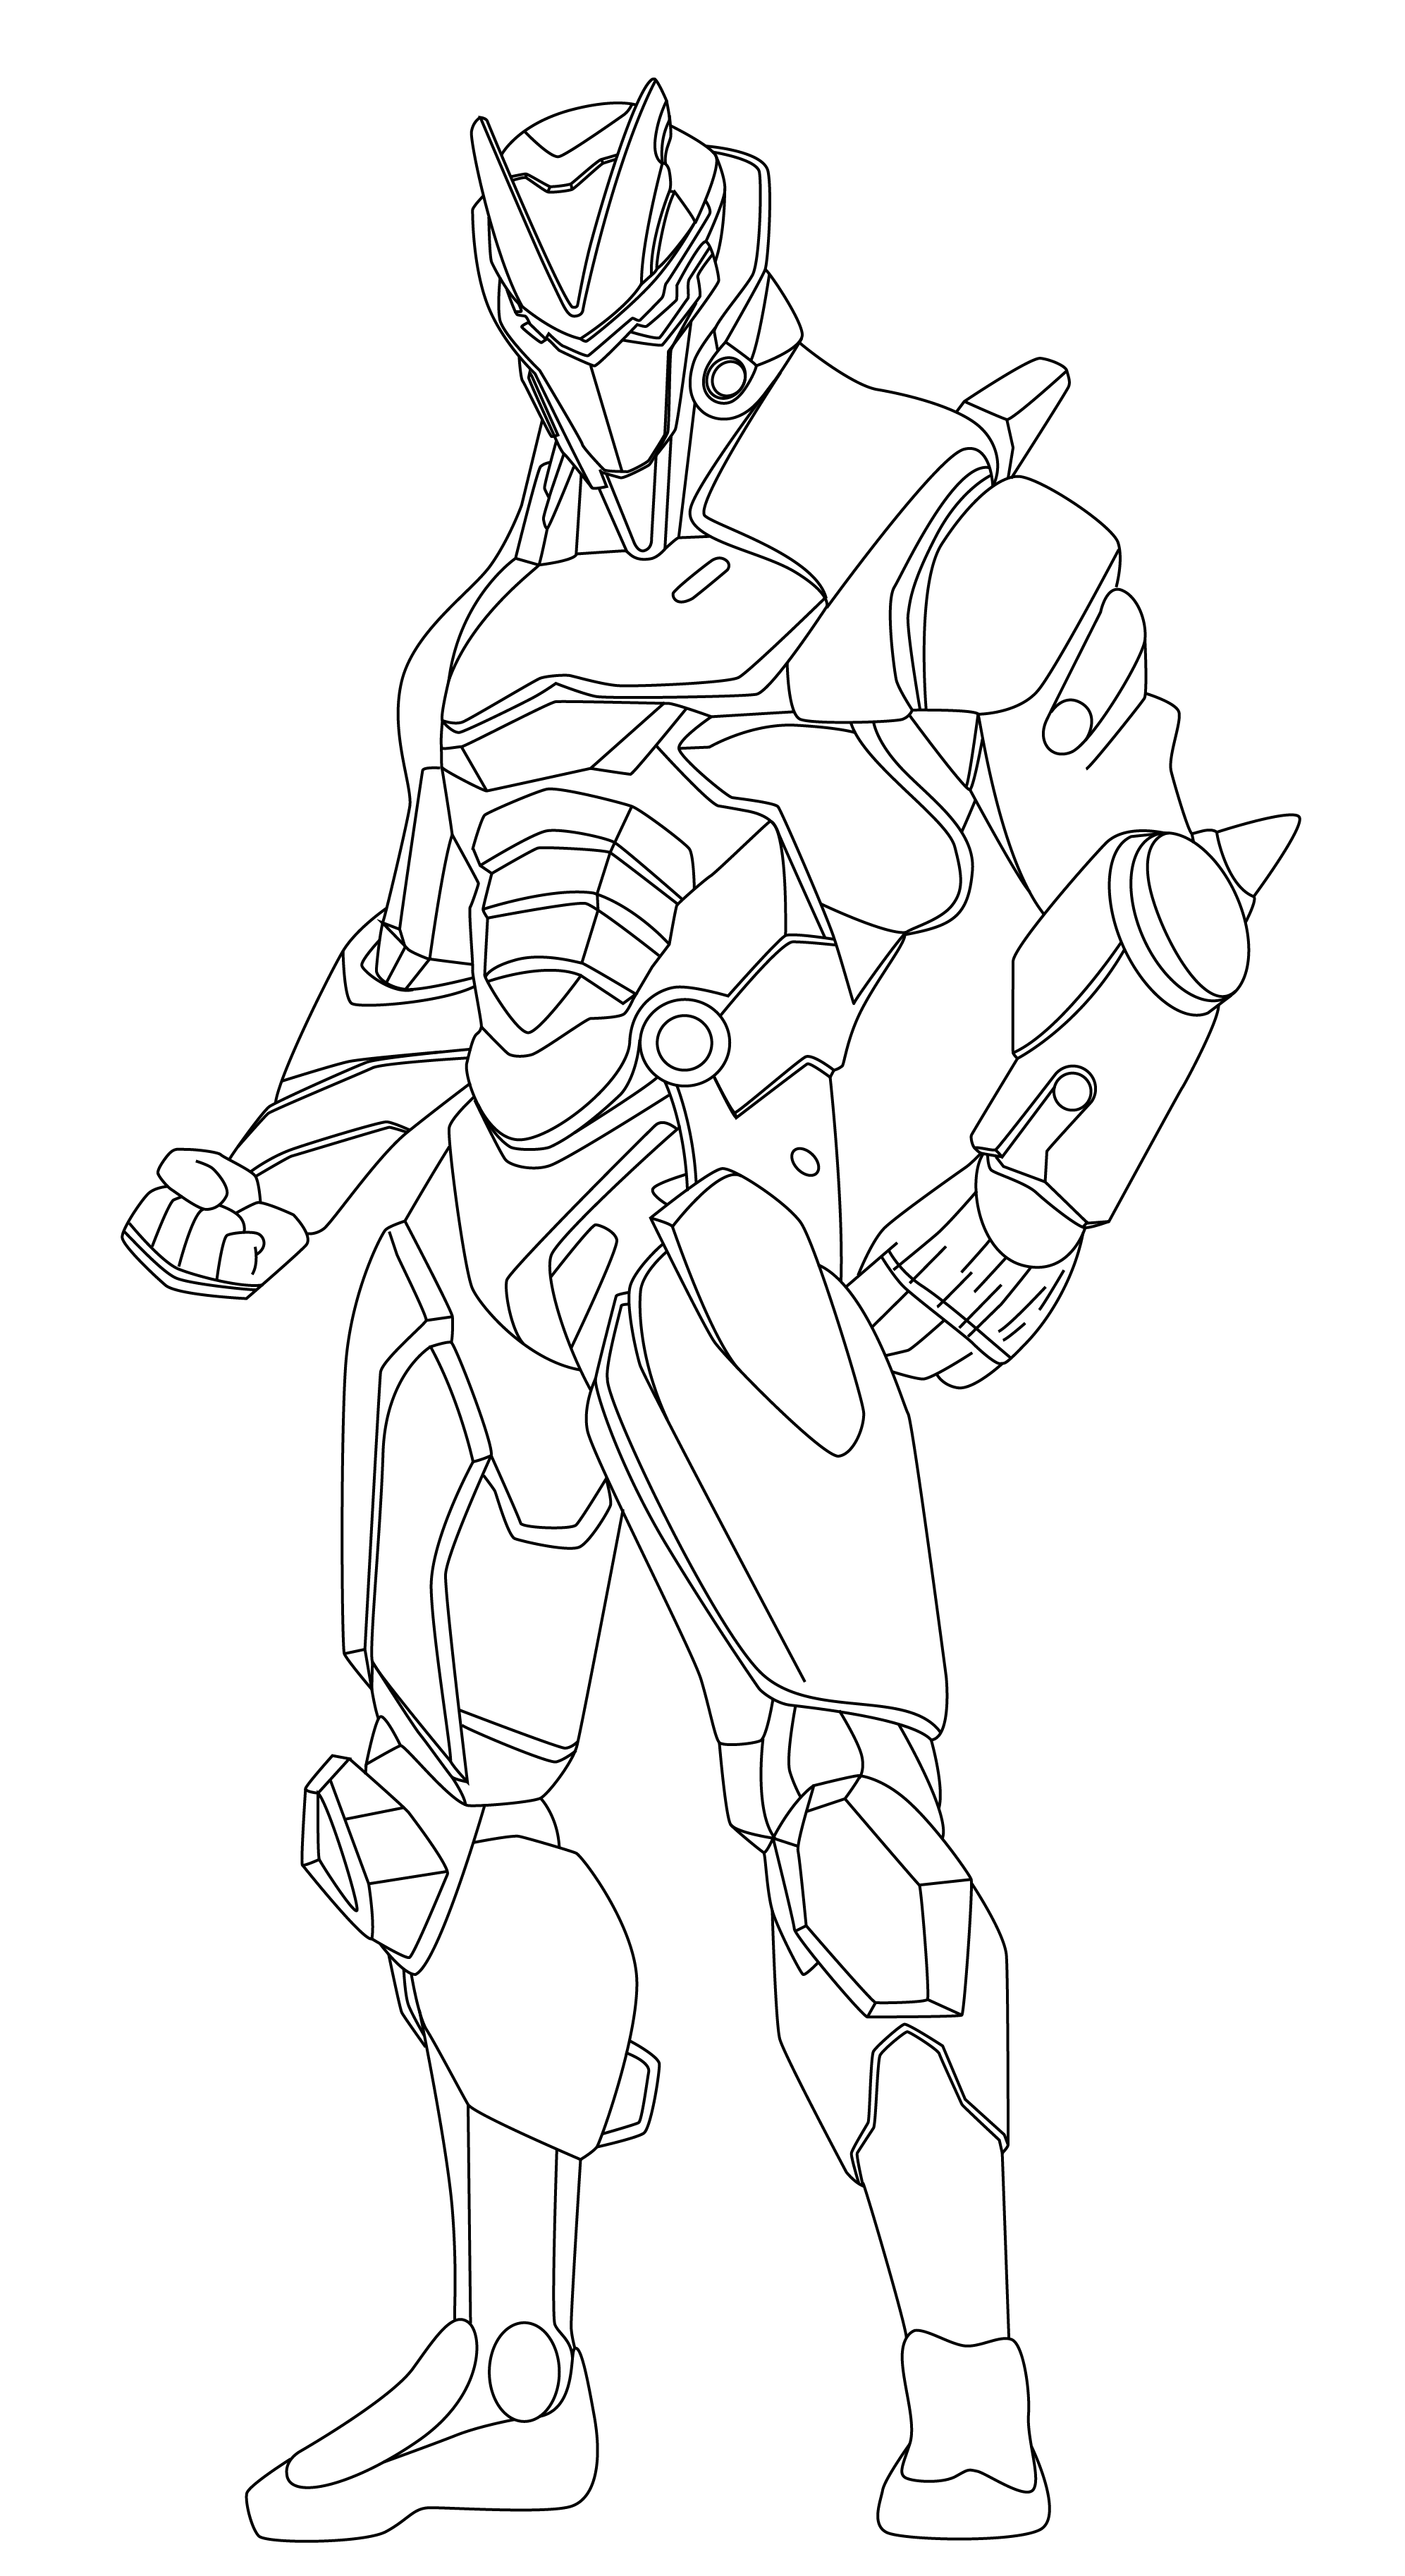 Omega Fortnite Hd Coloring Page